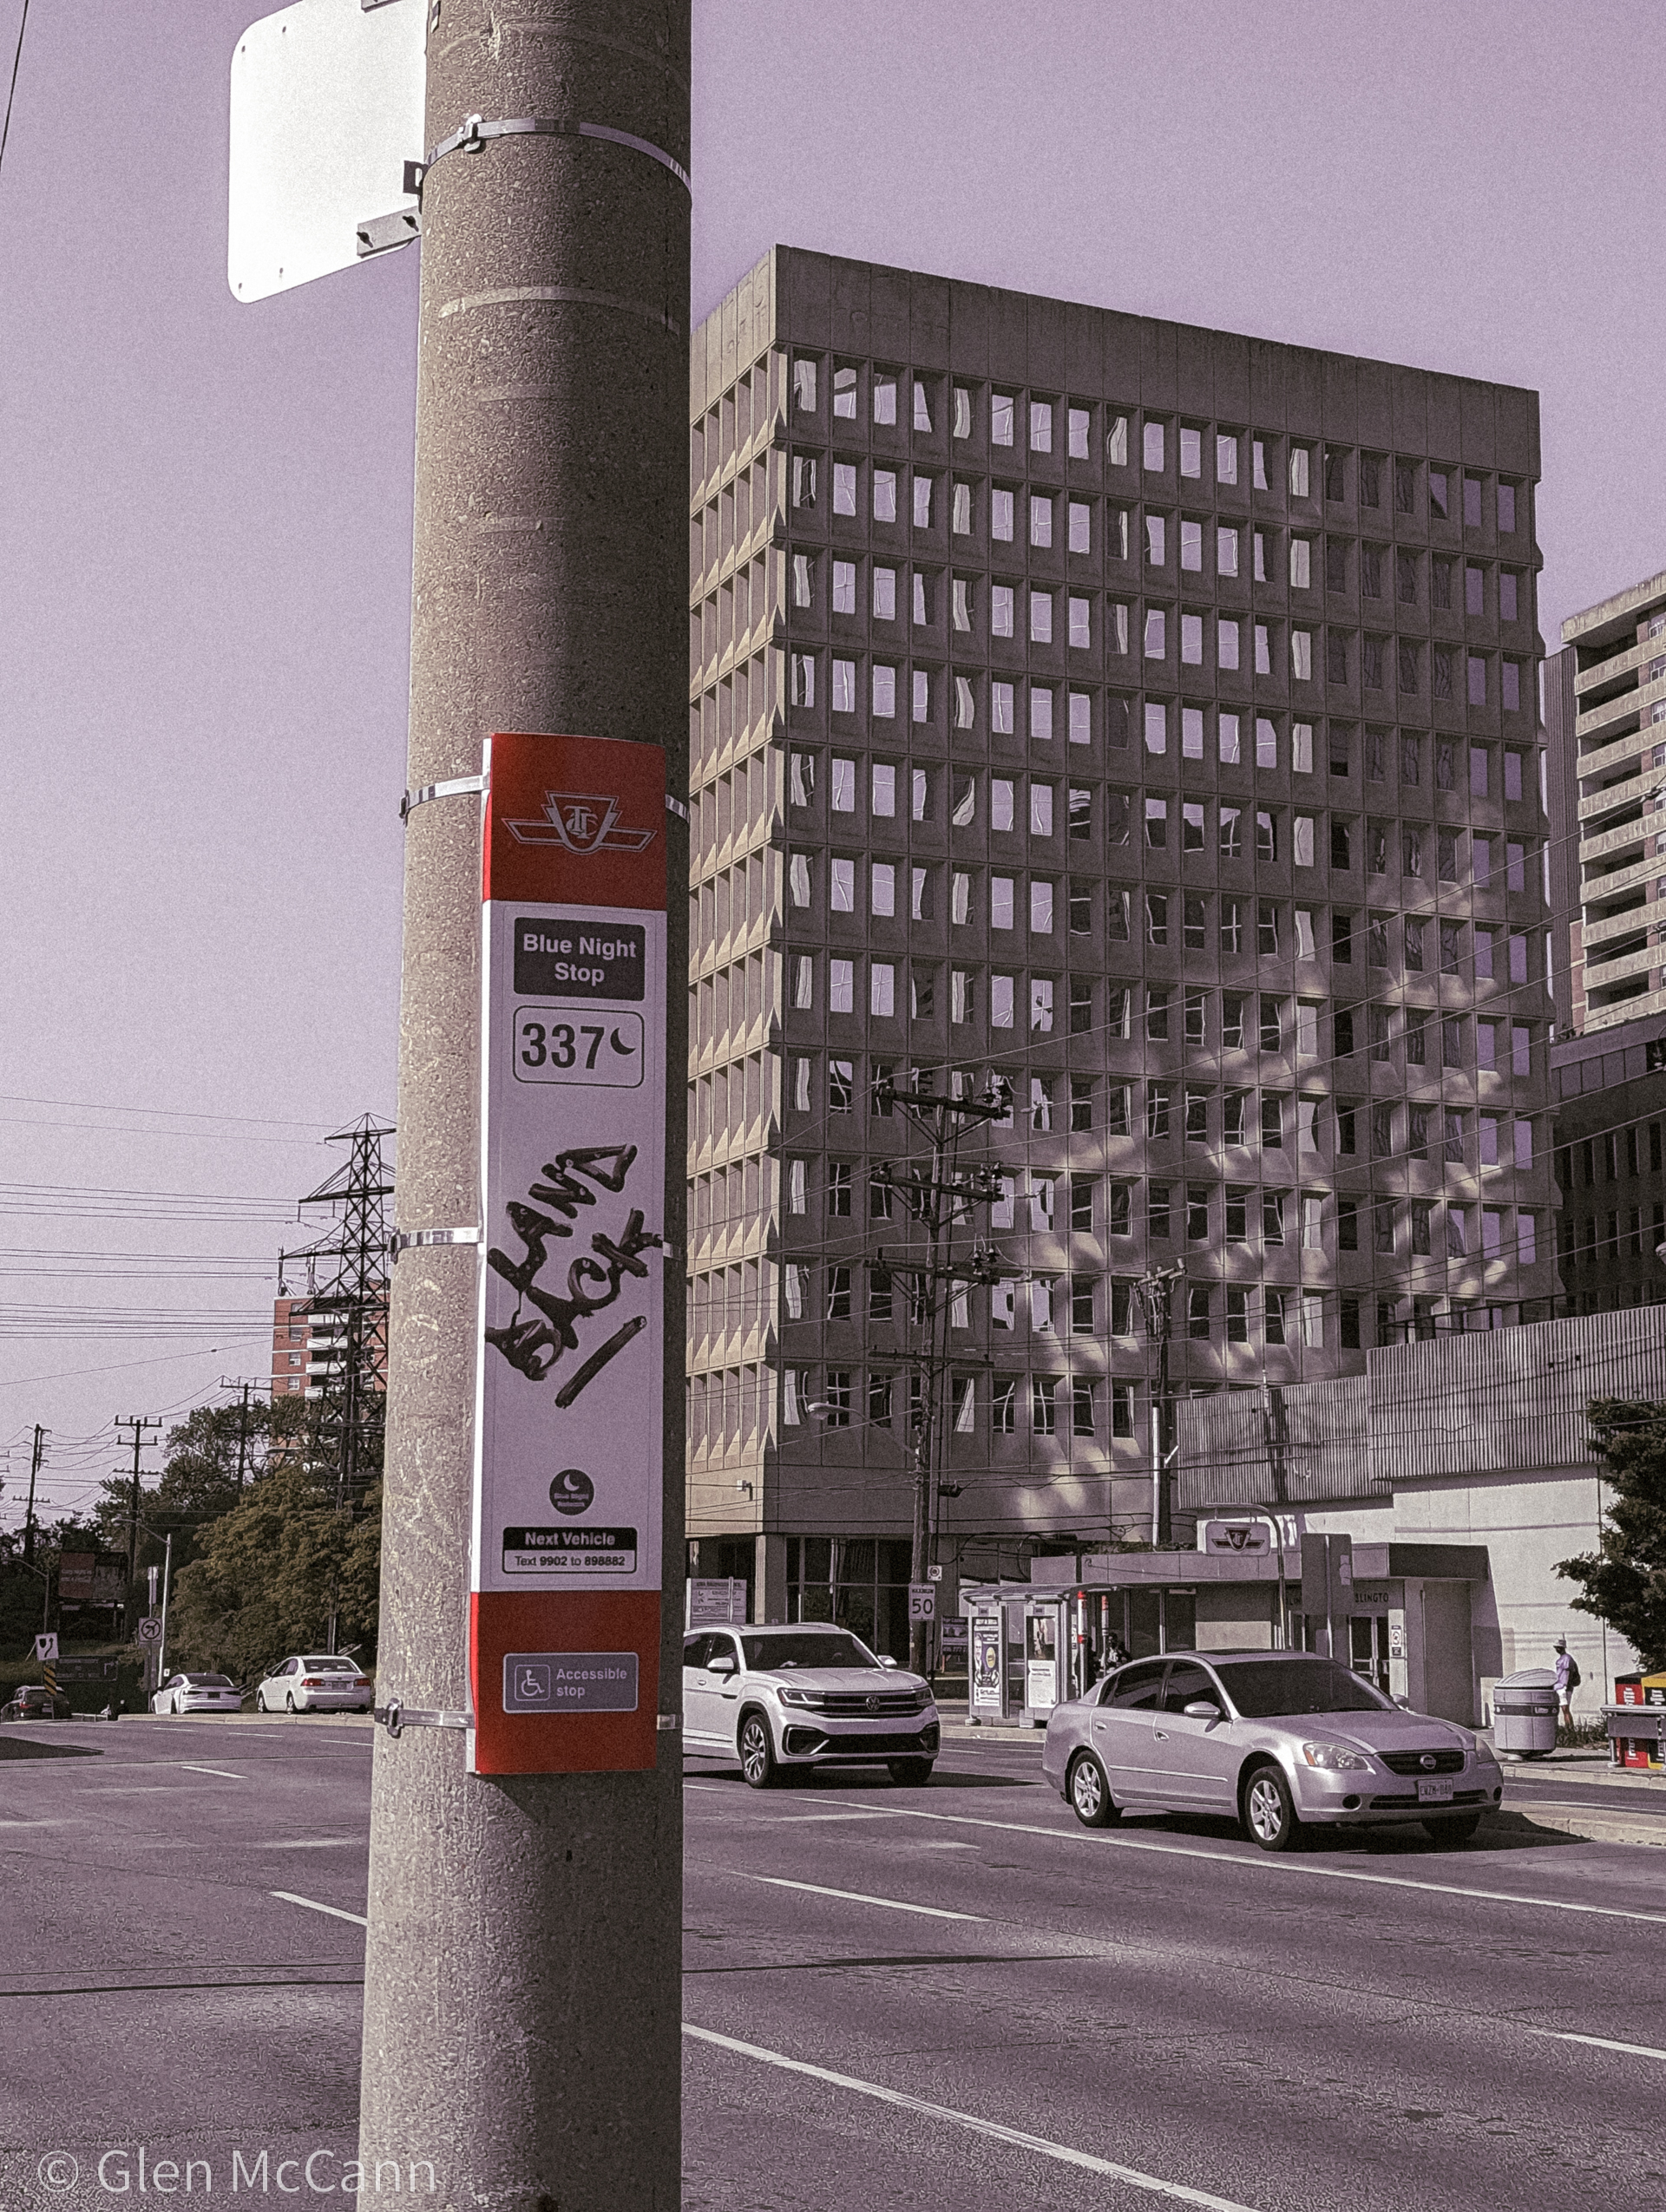 Photo of a TTC bus stop that has 'LAND BACK' written on it in black marker.